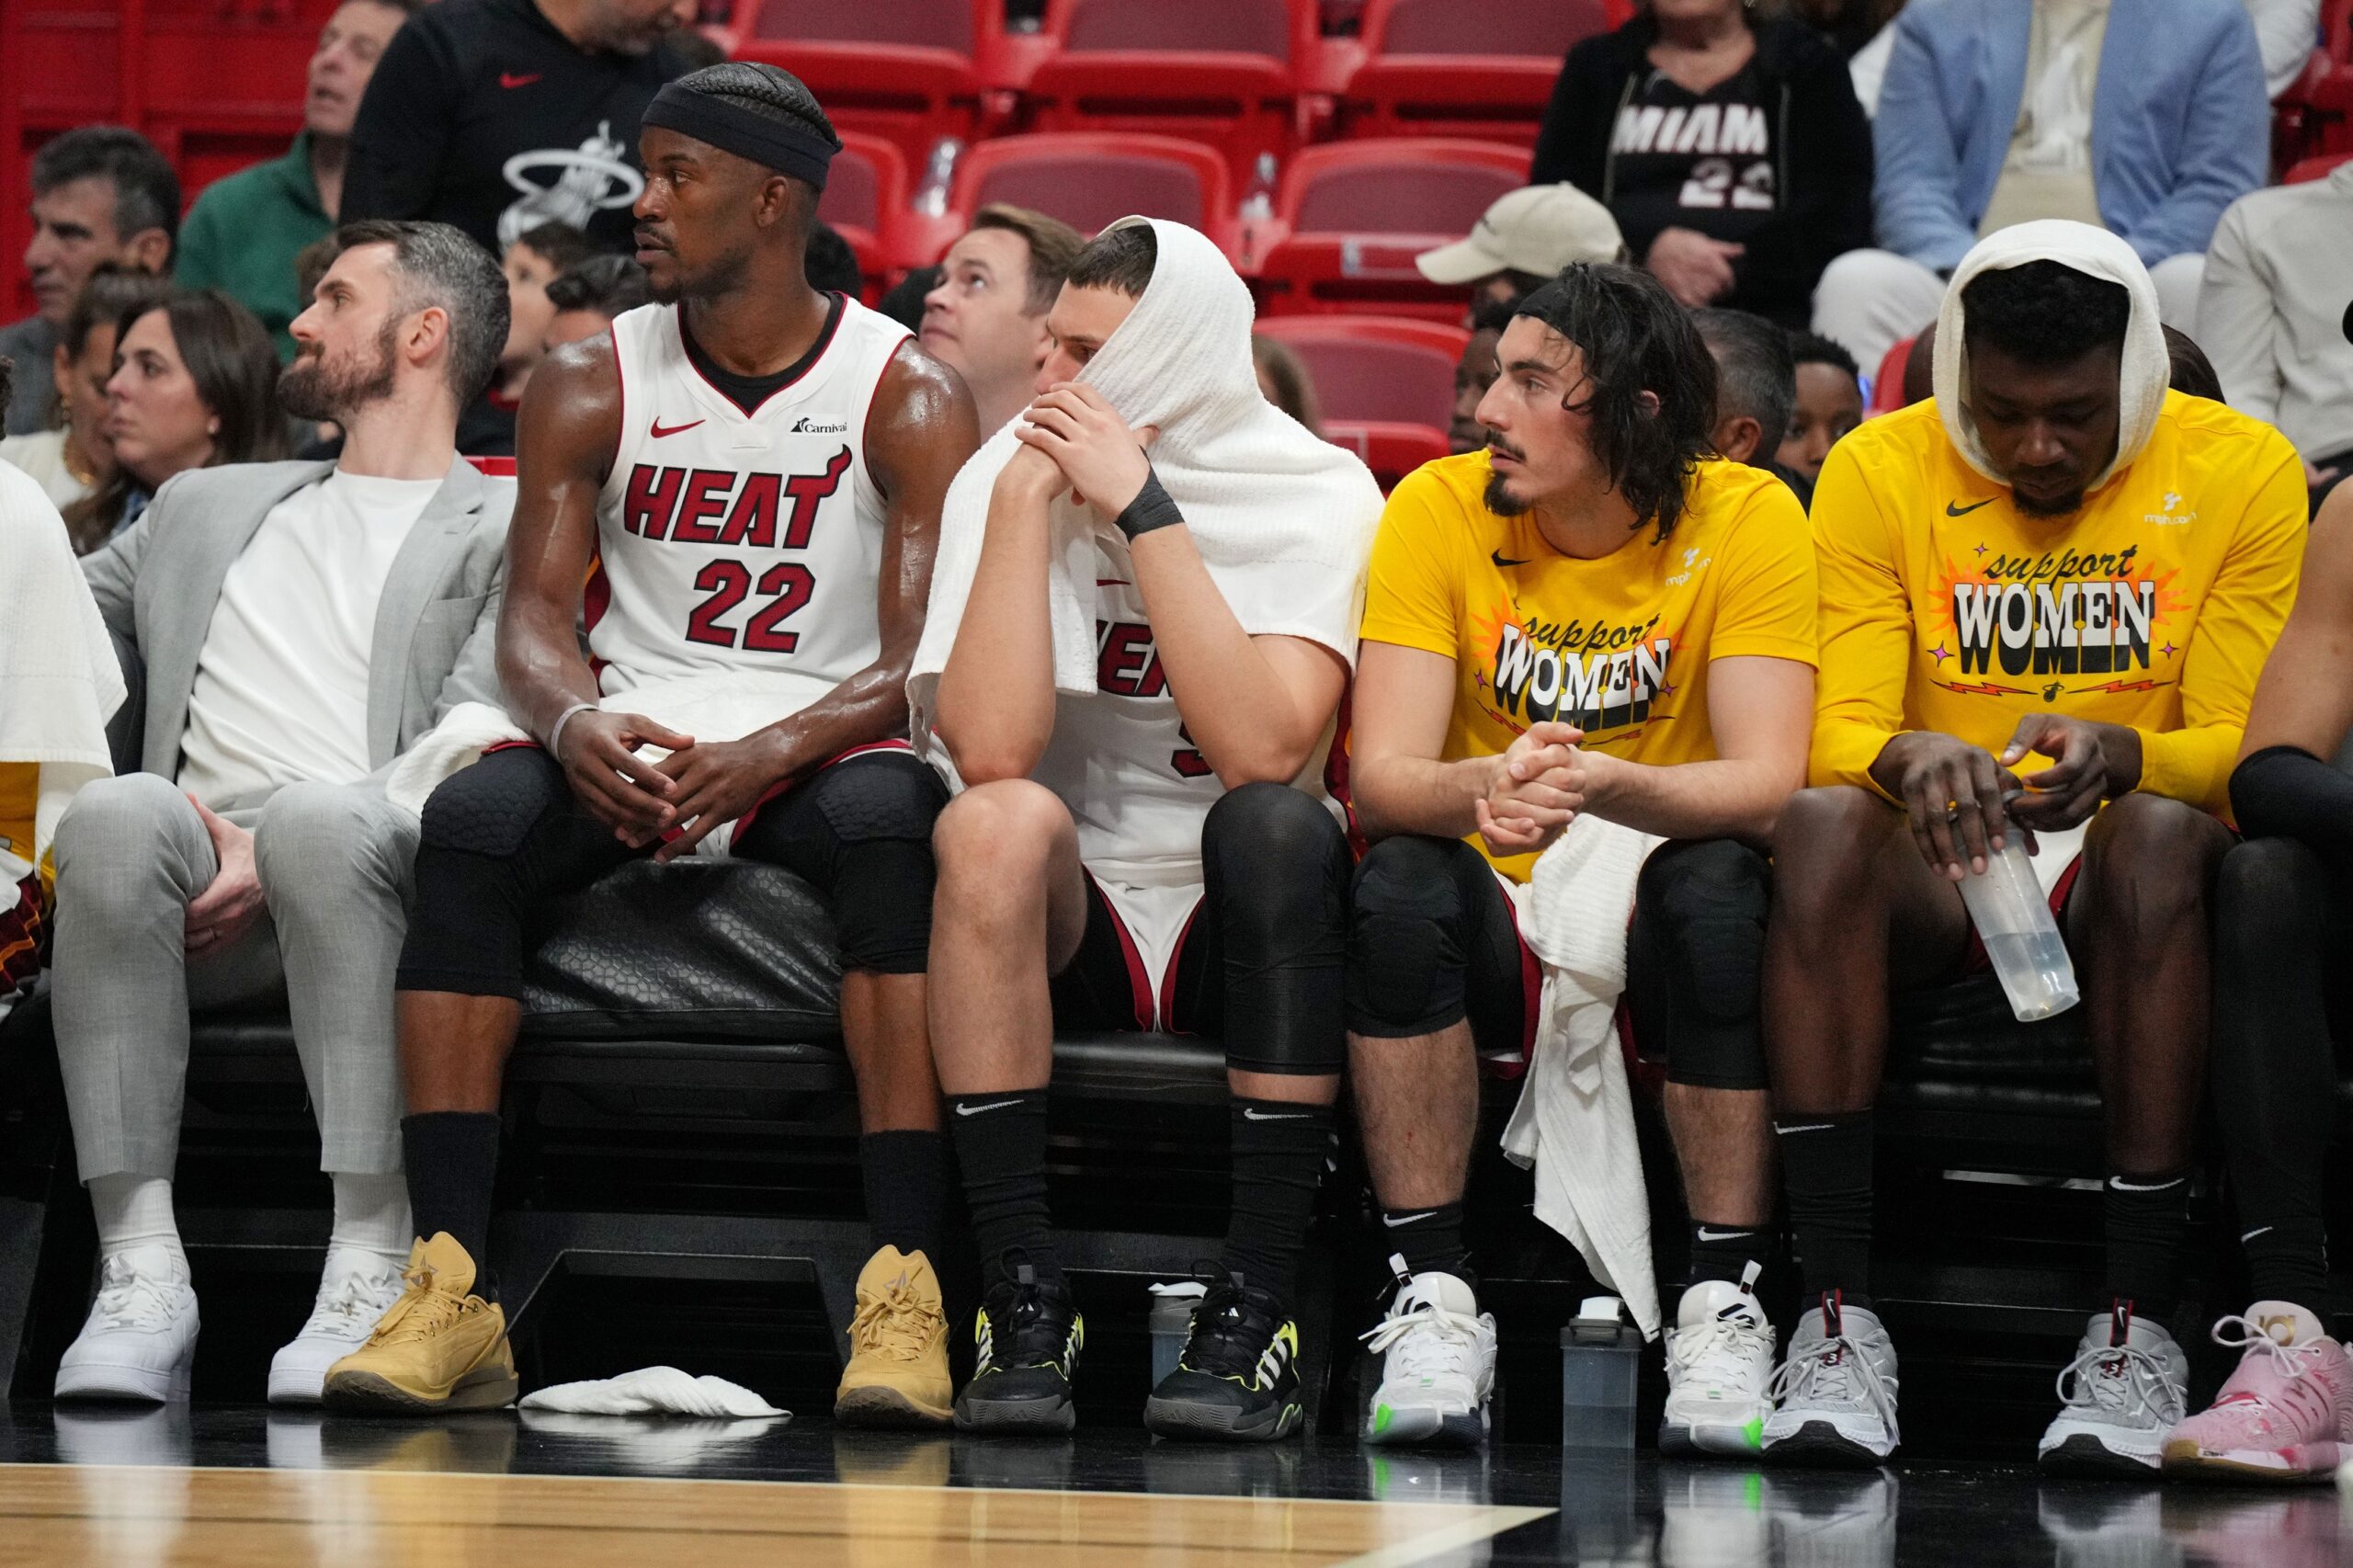 Jimmy Butler and rookie Jaime Jaquez Jr. on the Miami Heat bench